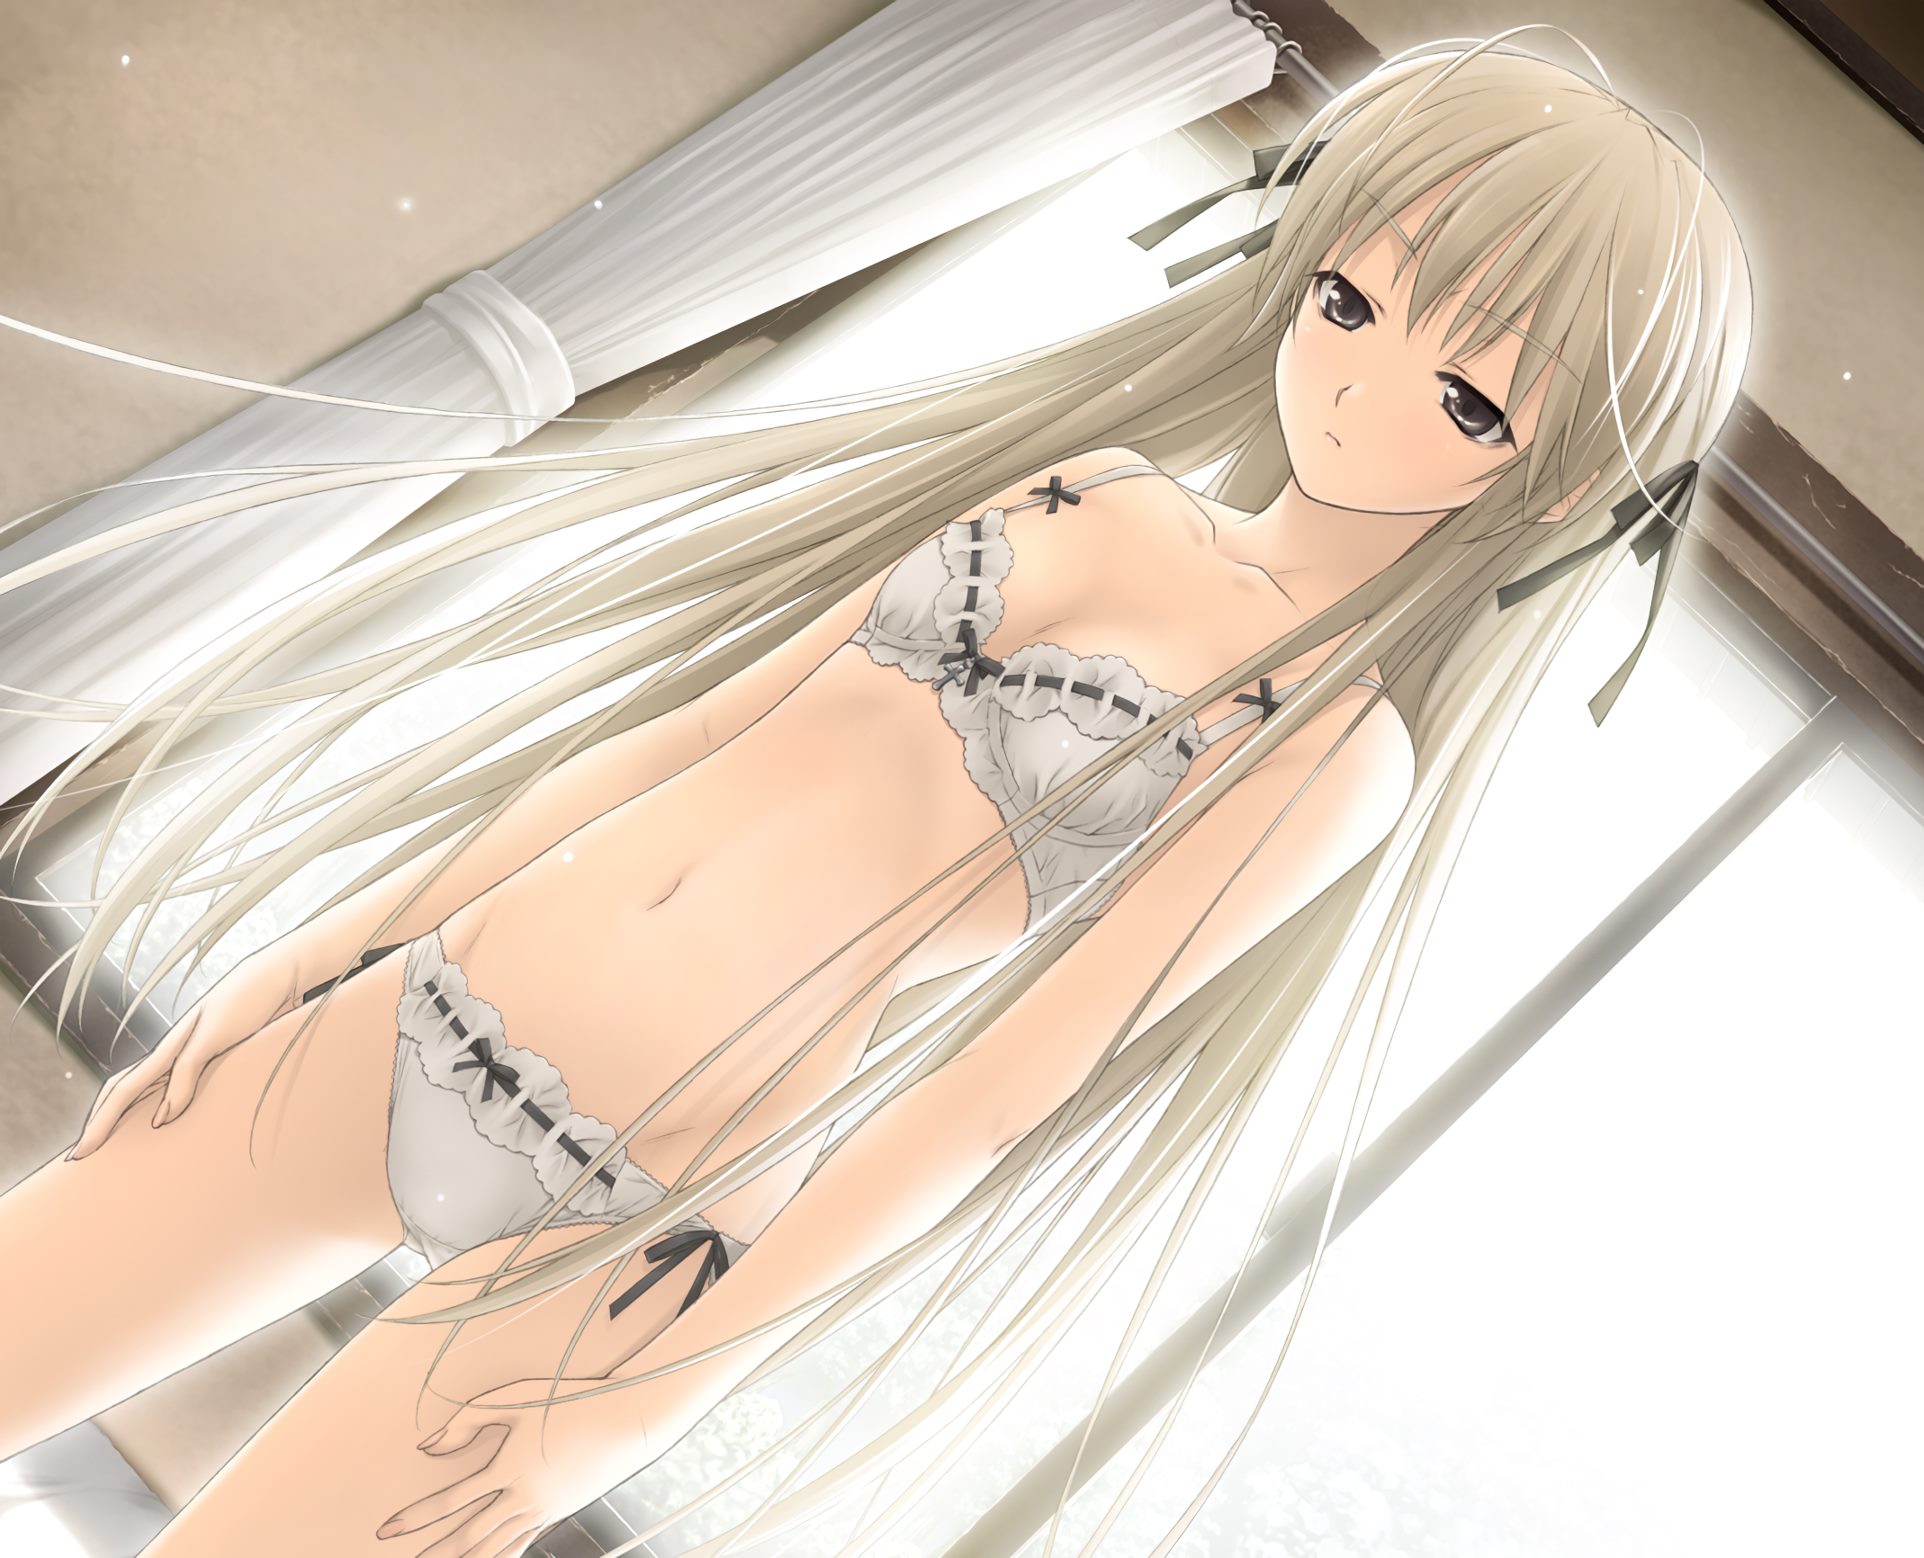 Others] Yosuga no Sora - vFinal by Sphere 18+ Adult xxx Porn Game Download